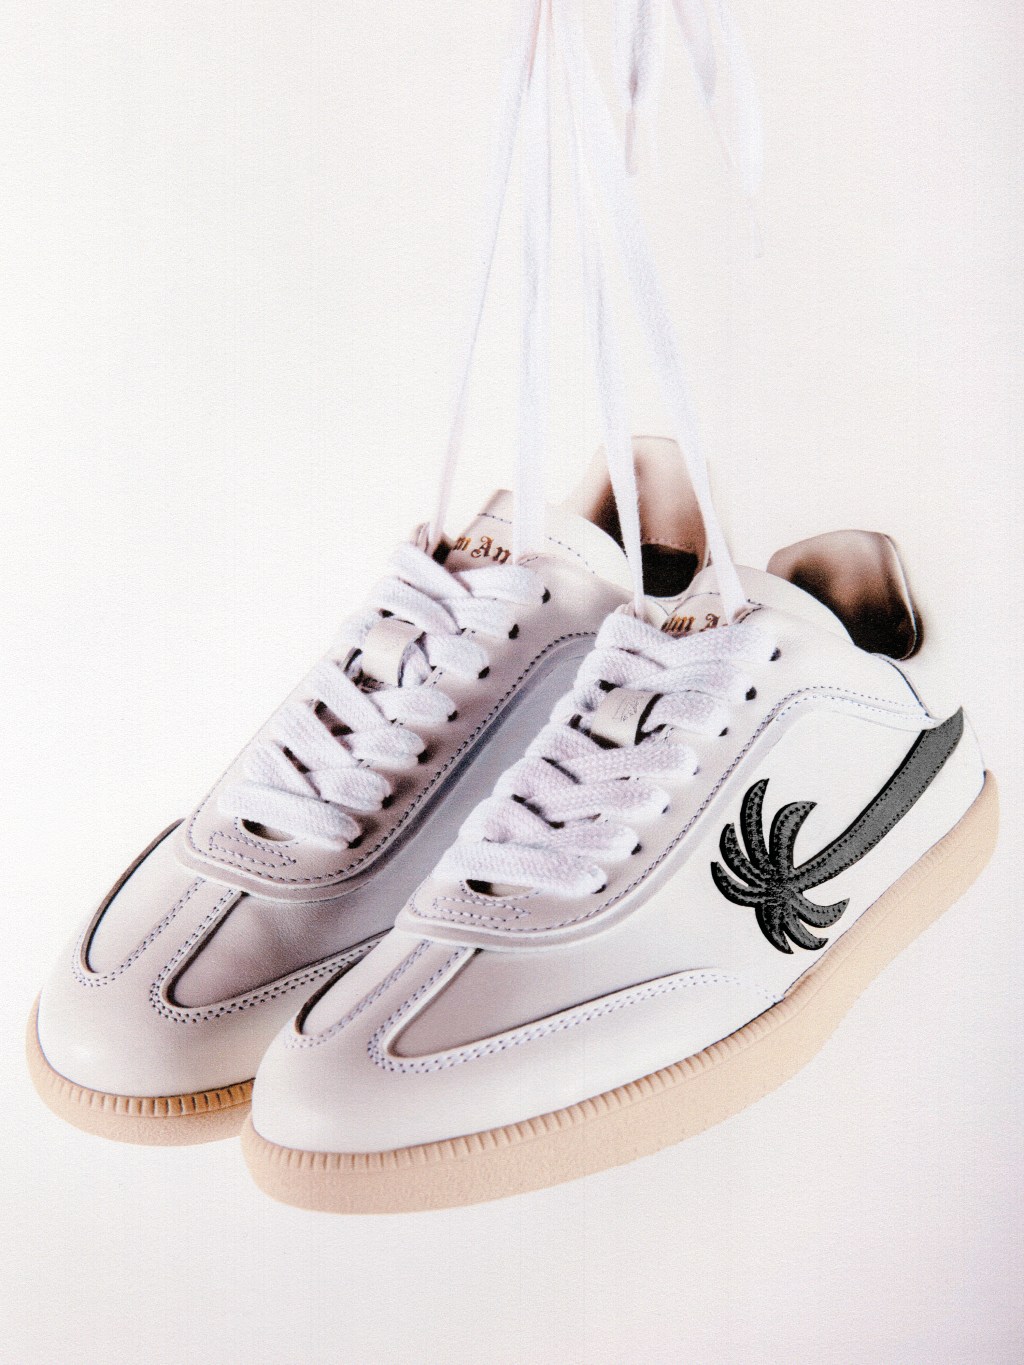 palm-angels-revisits-tod’s sneakers